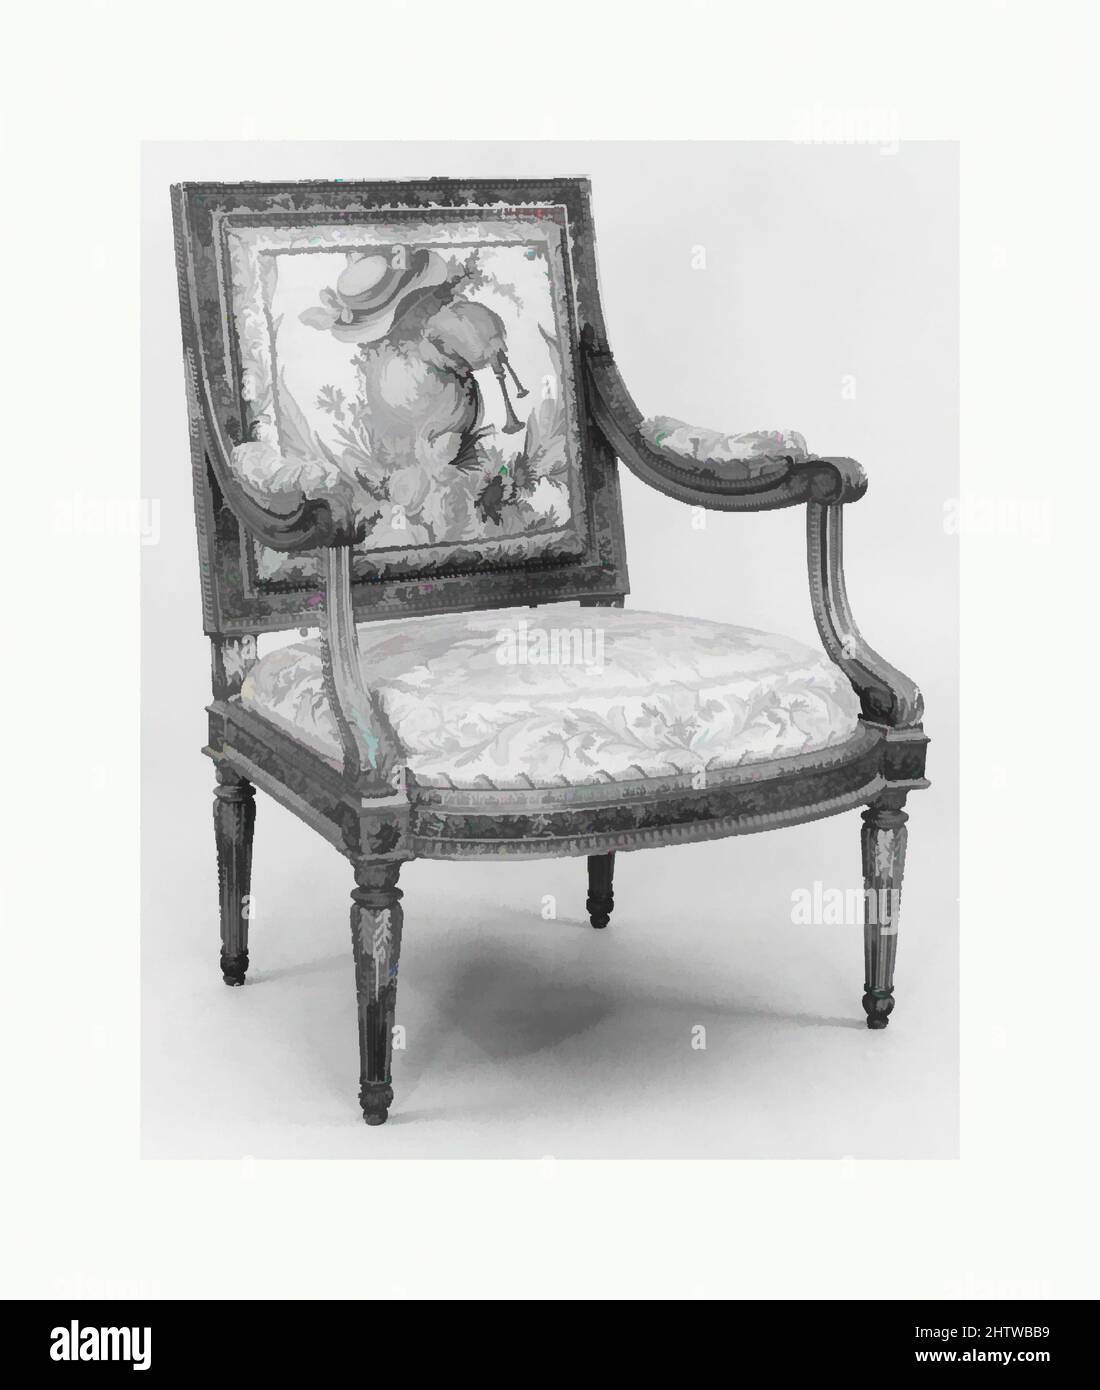 Art inspired by Armchair (part of a set ), ca. 1785, French, Paris, Carved and gilded walnut, 18th-century embroidered silk-satin not original to the frame, H. 37-5/8 x W. 28 x D. 29 in. (95.6 x 71.1 x 73.7 cm), Woodwork-Furniture, Georges Jacob (French, 1739–1814), embroidered, Classic works modernized by Artotop with a splash of modernity. Shapes, color and value, eye-catching visual impact on art. Emotions through freedom of artworks in a contemporary way. A timeless message pursuing a wildly creative new direction. Artists turning to the digital medium and creating the Artotop NFT Stock Photo